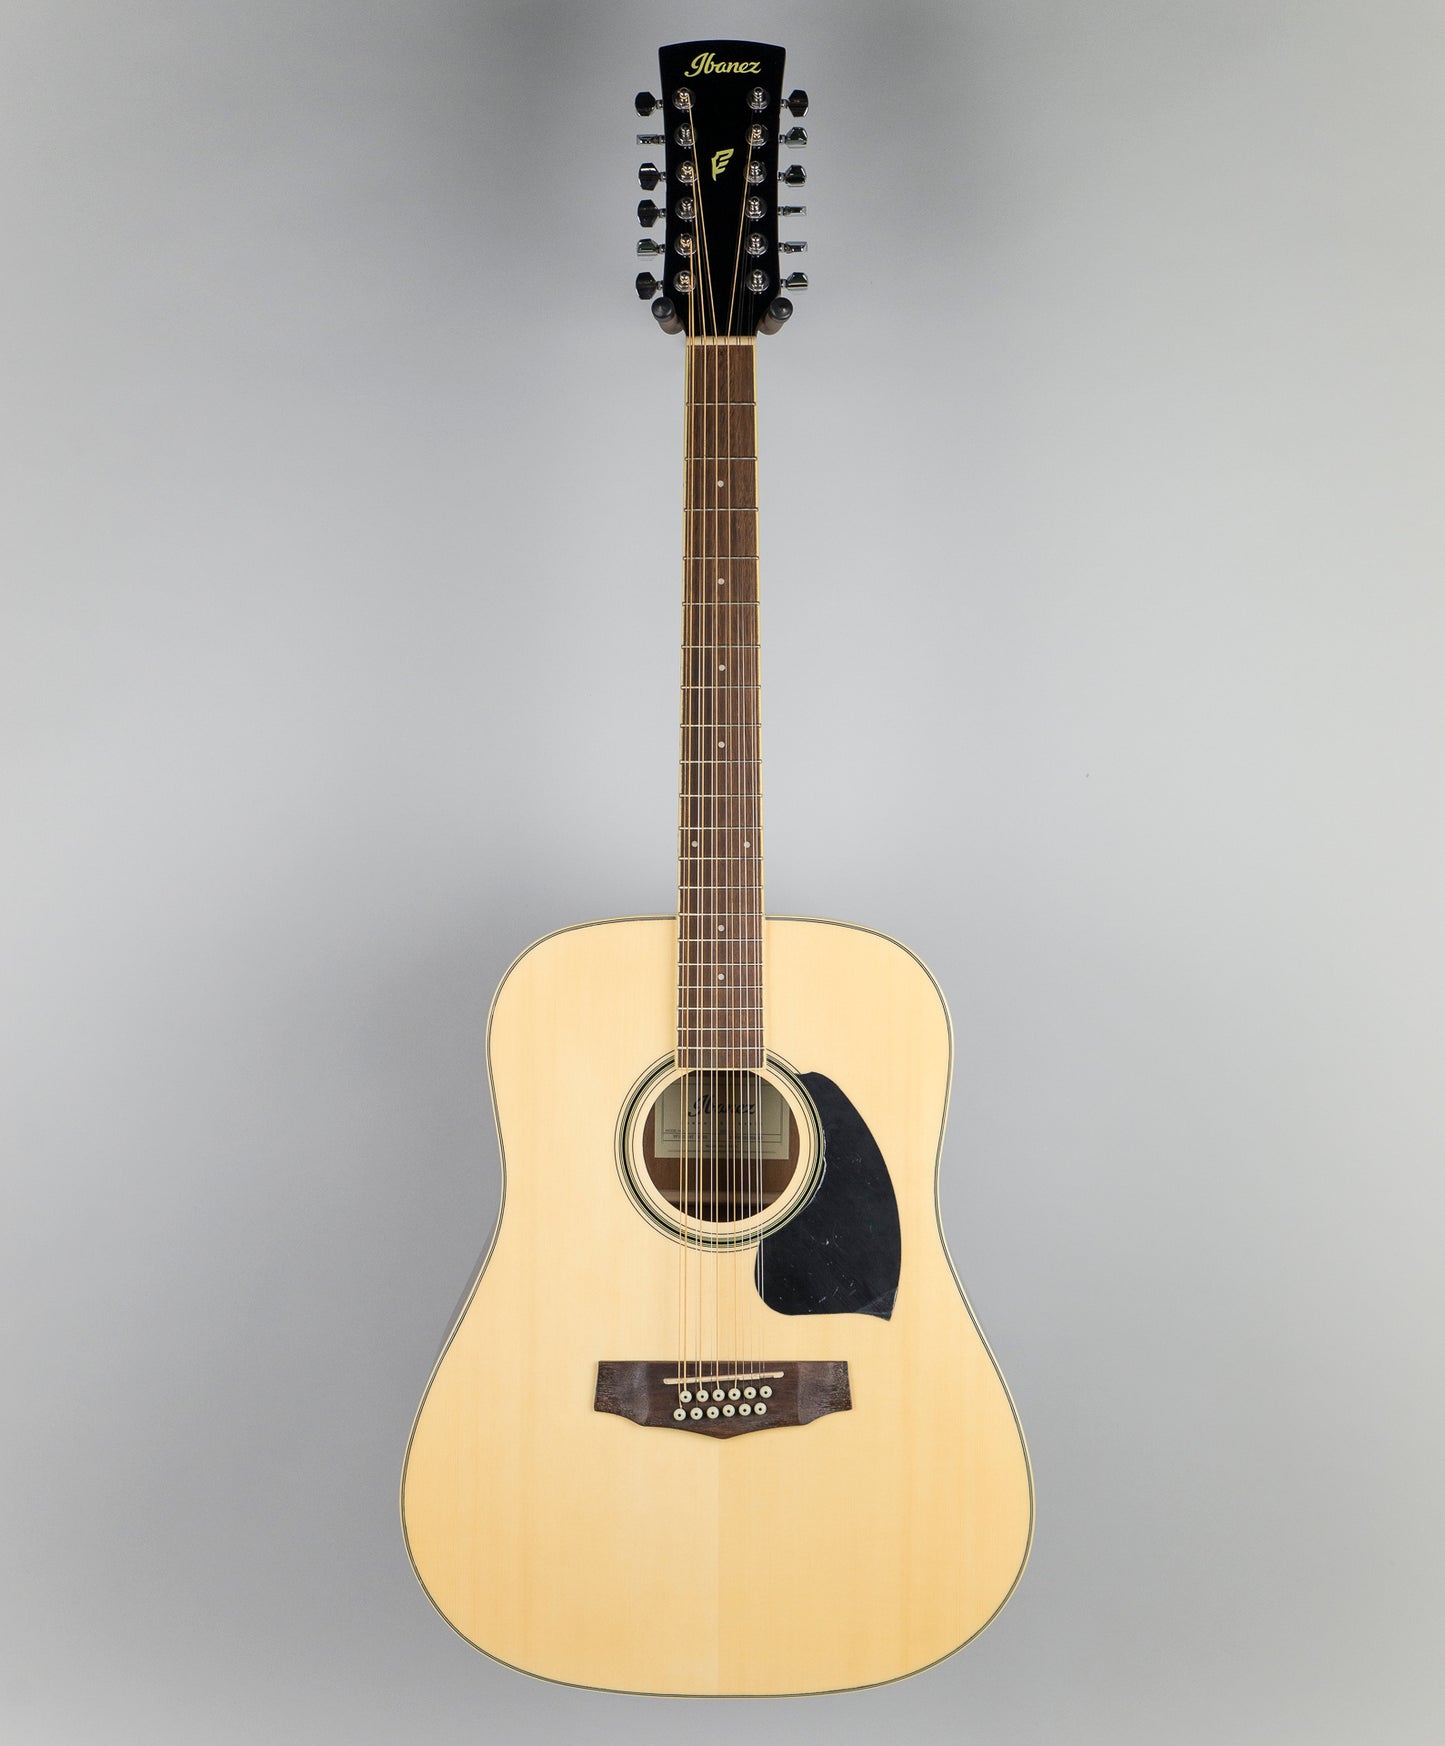 Ibanez Performance 12-String Acoustic Guitar in Natural High Gloss